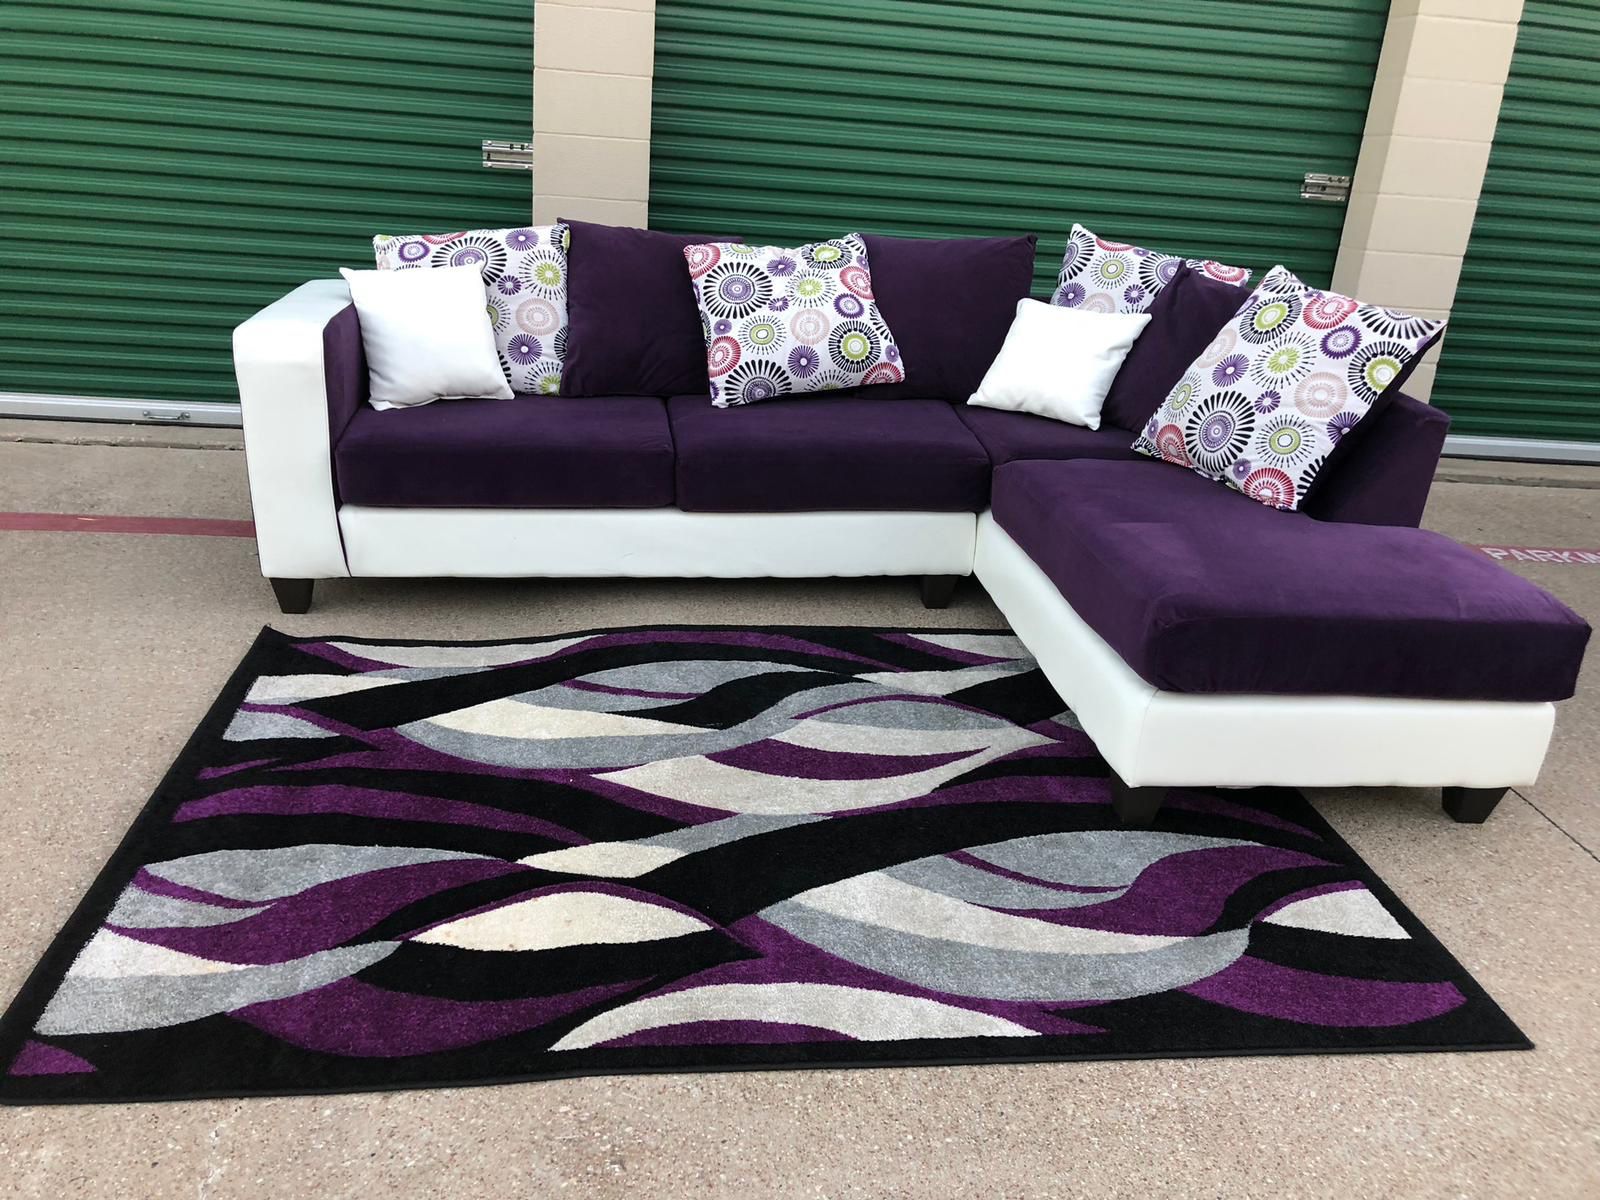 Can deliver - like new purple sectional couch sofa (NO RUG)